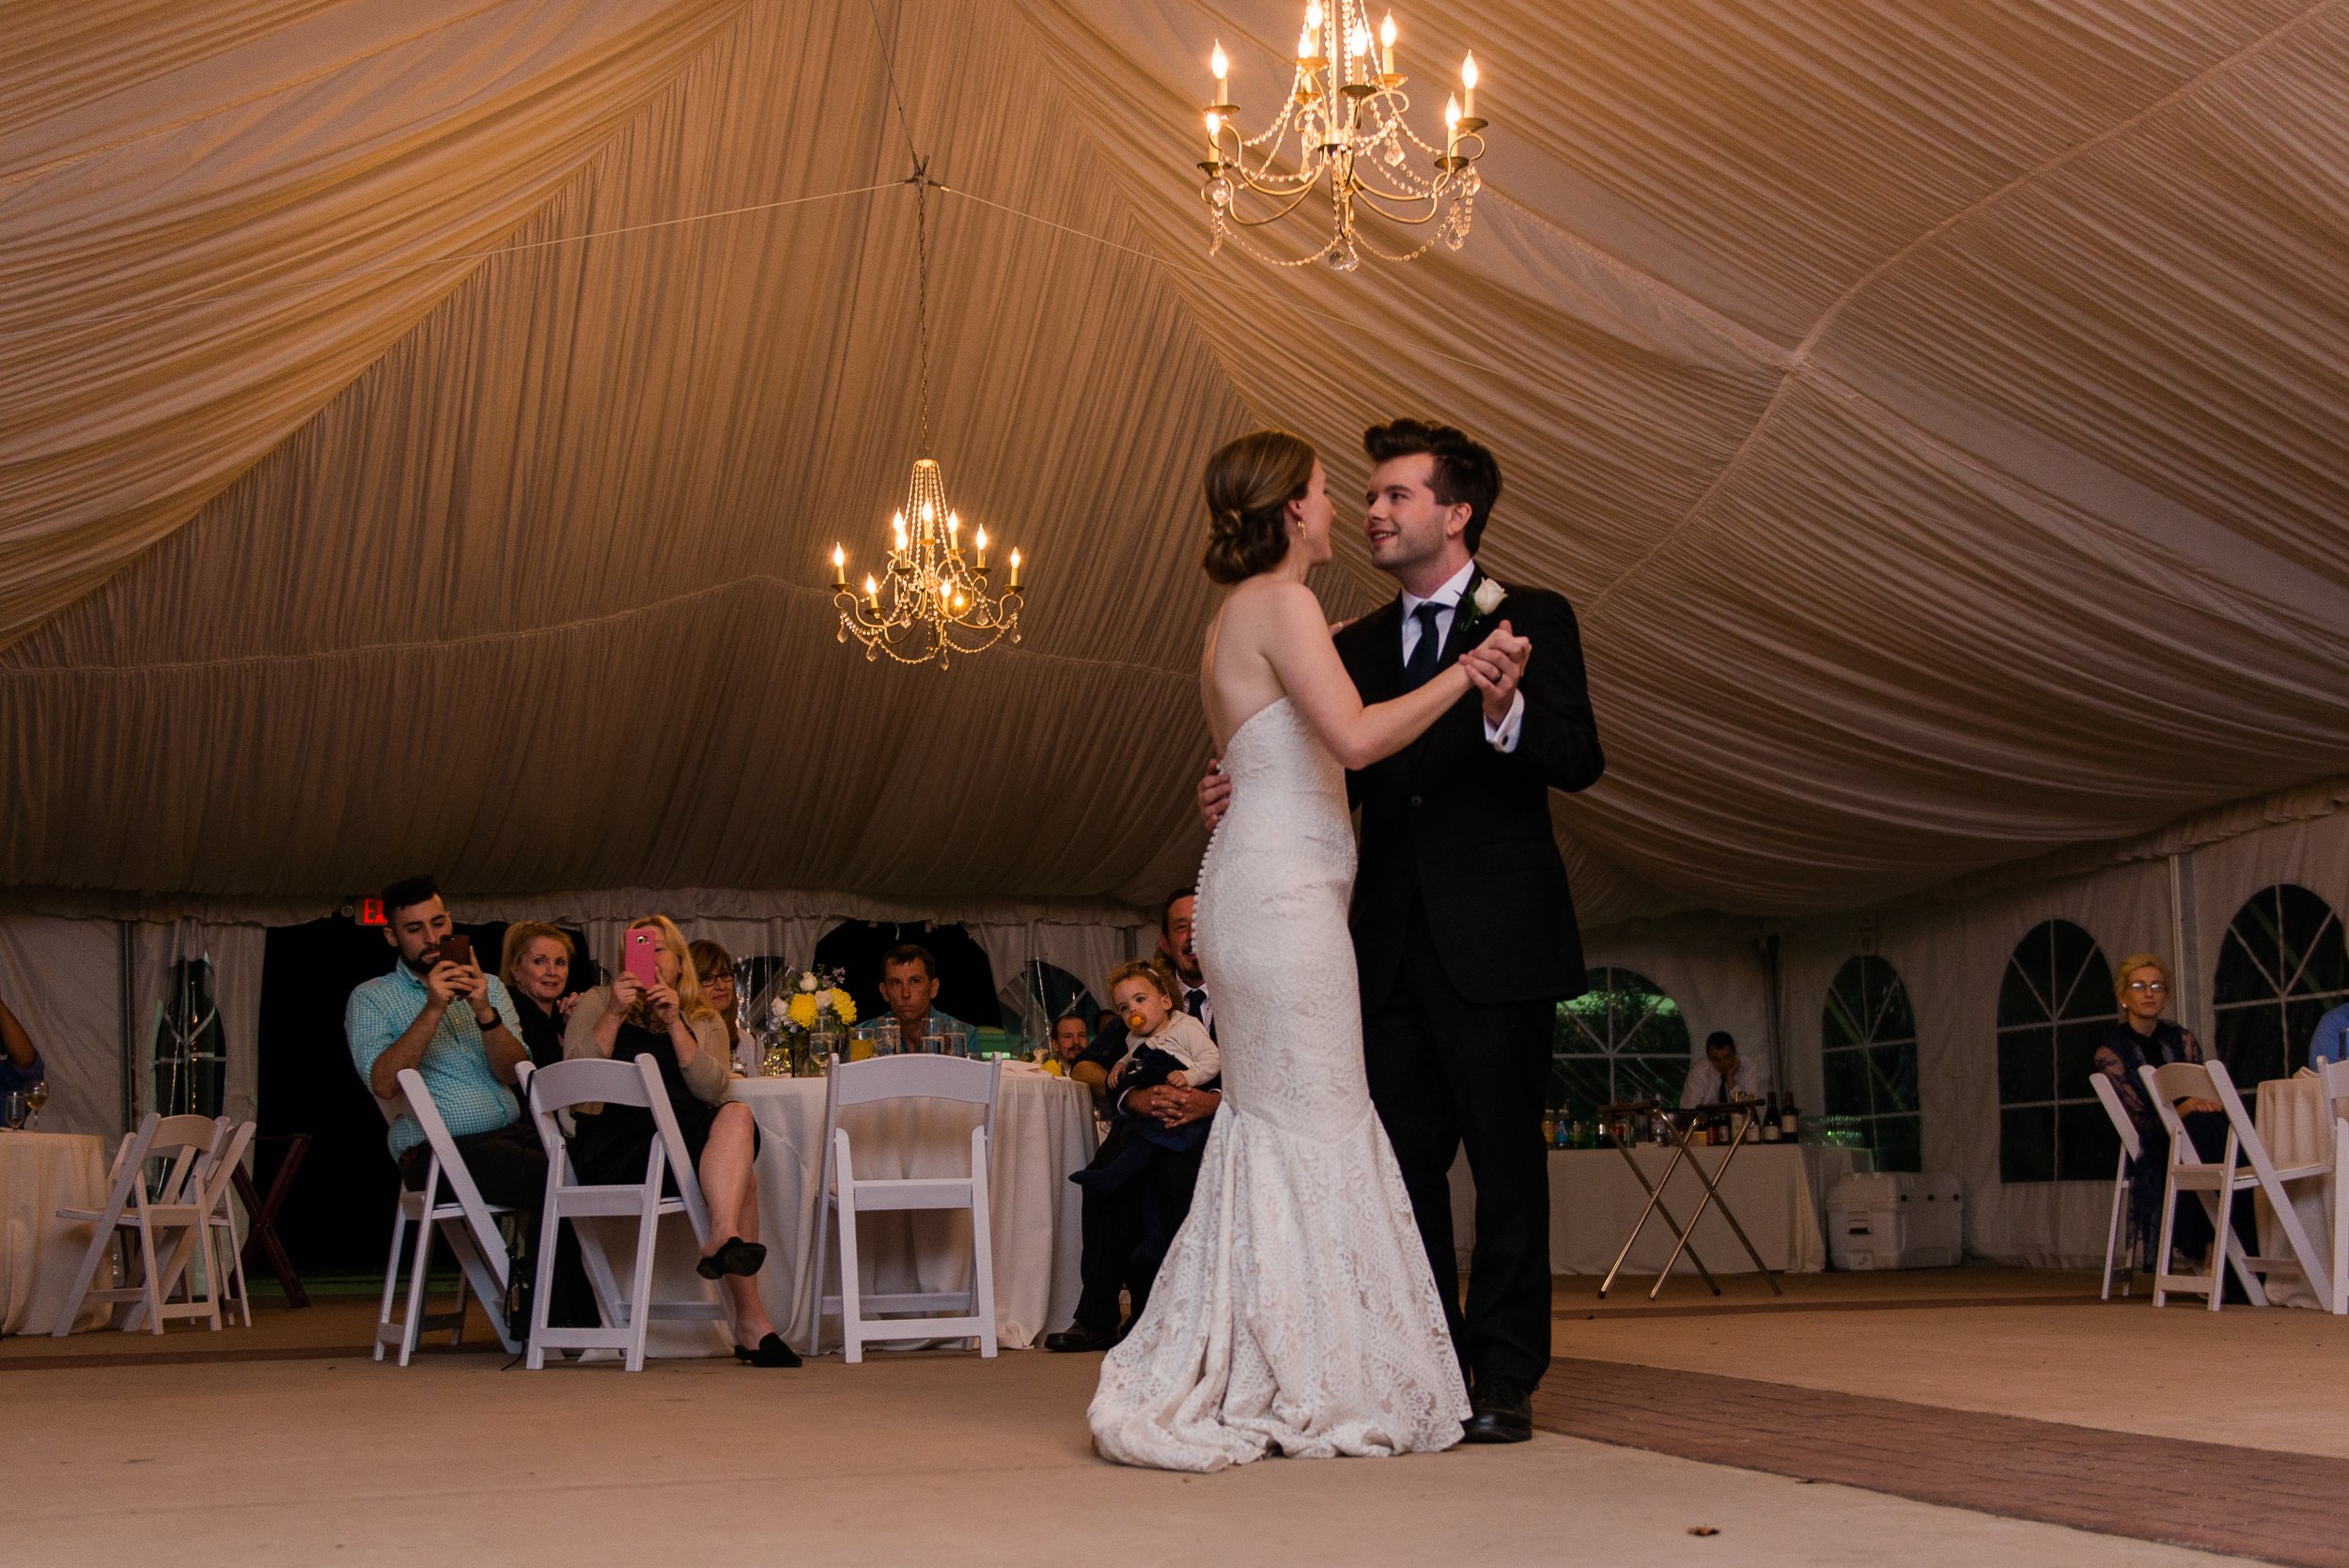 A bride and groom share their first dance during their tented wedding reception at Oatlands Historic House and Gardens in Loudoun County Virginia